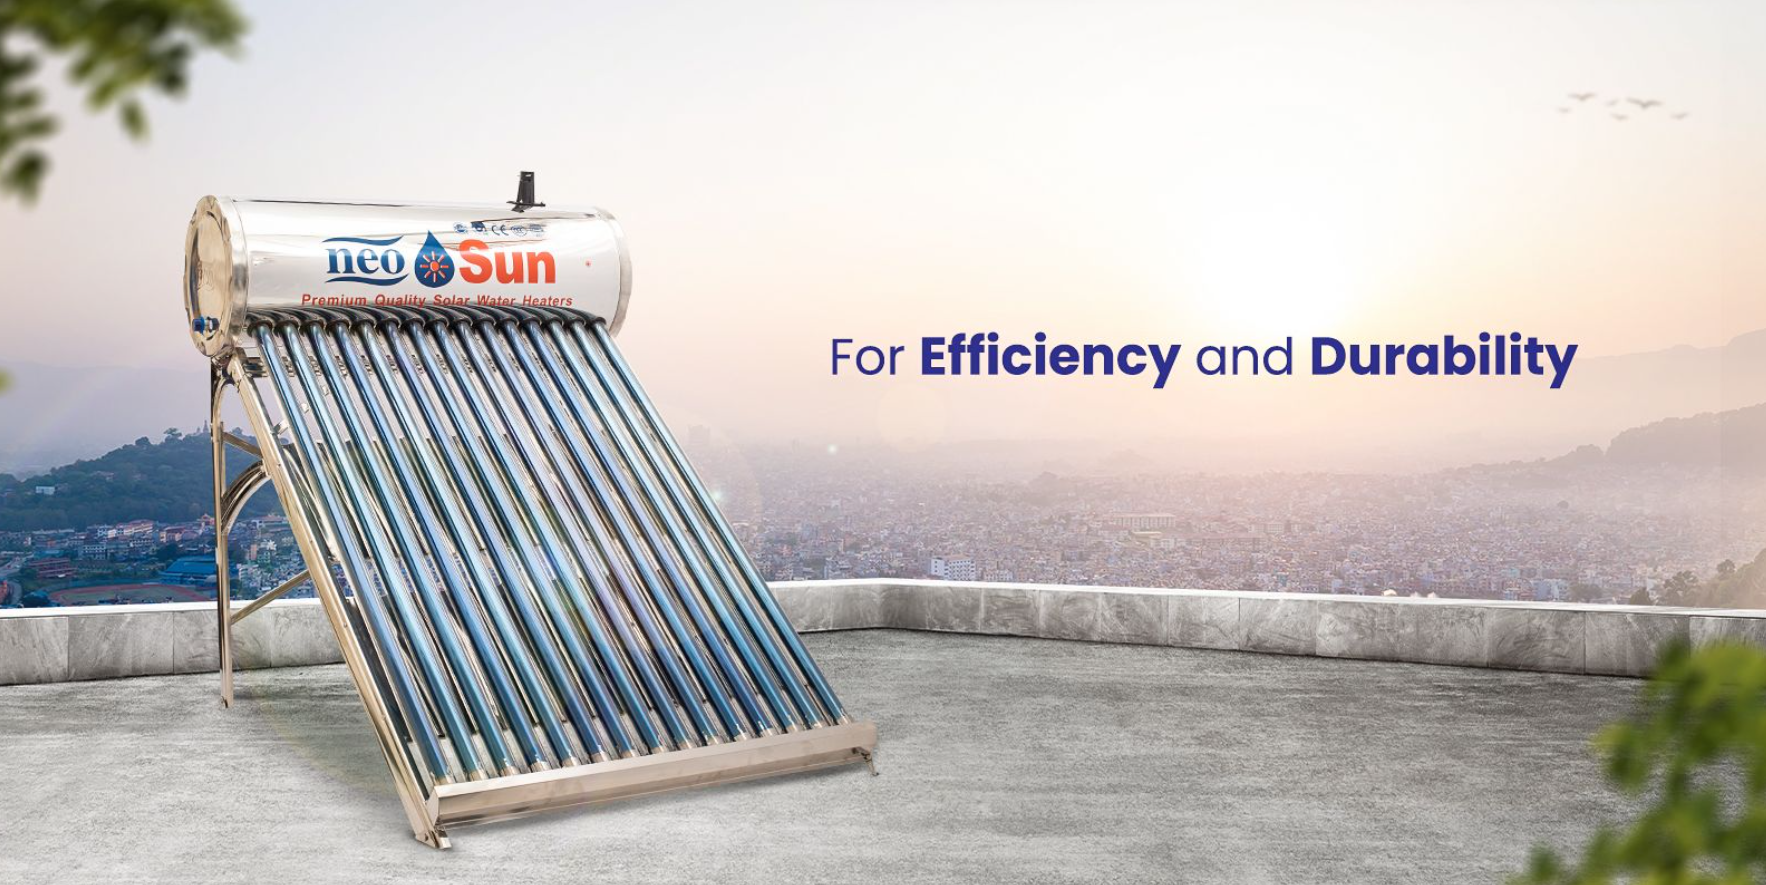 Top Recommendations for The Best Solar Water Heaters In Nepal